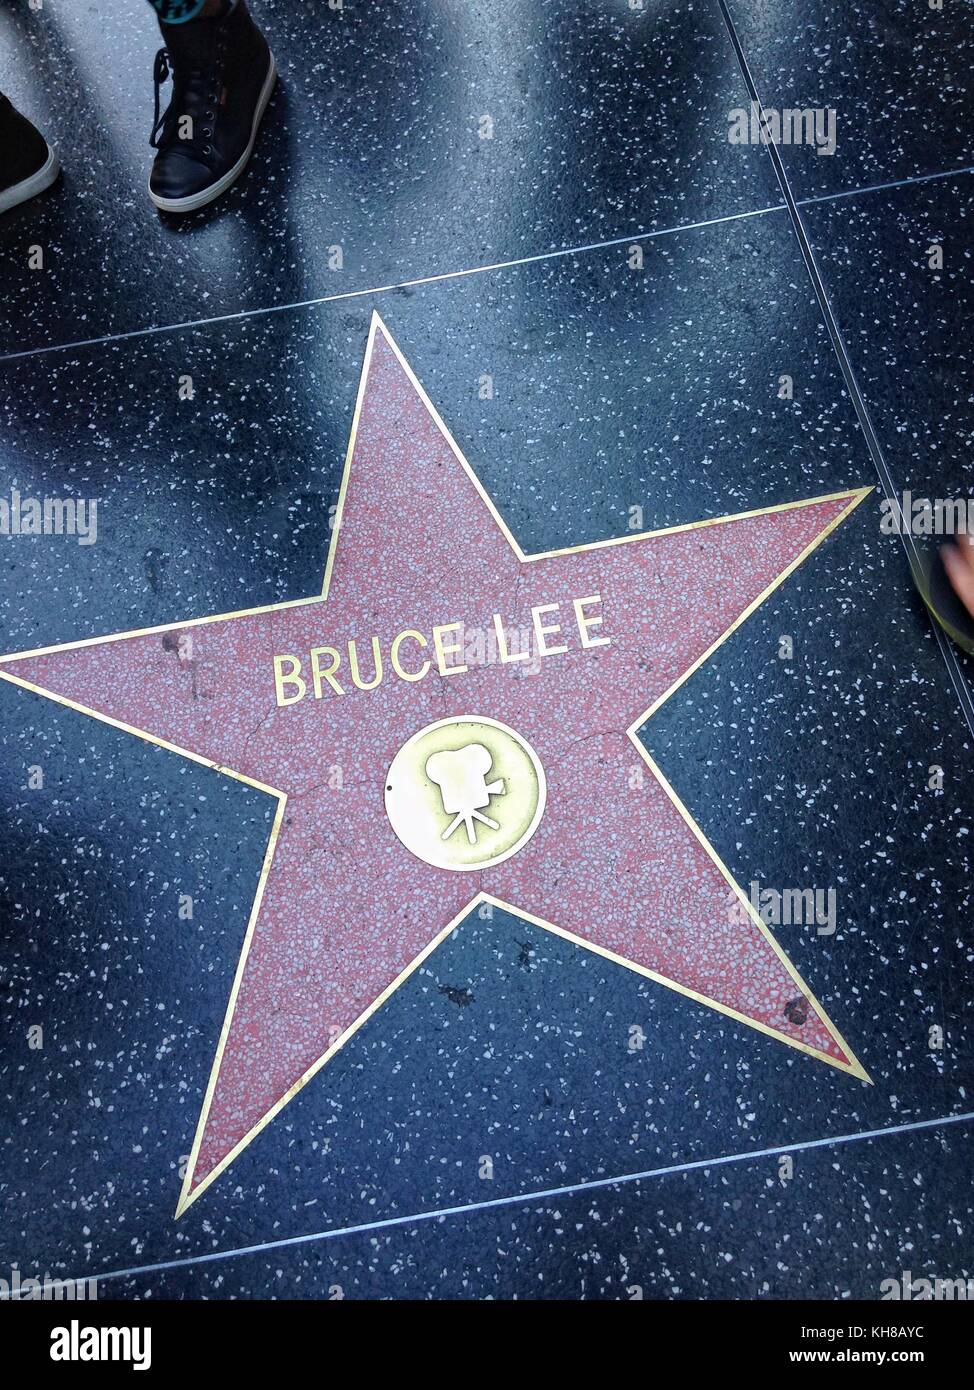 Hollywood, California - July 26 2017: Bruce Lee Hollywood walk of fame star on July 26, 2017 in Hollywood, CA. Lee Jun-fan, known professionally as Br Stock Photo